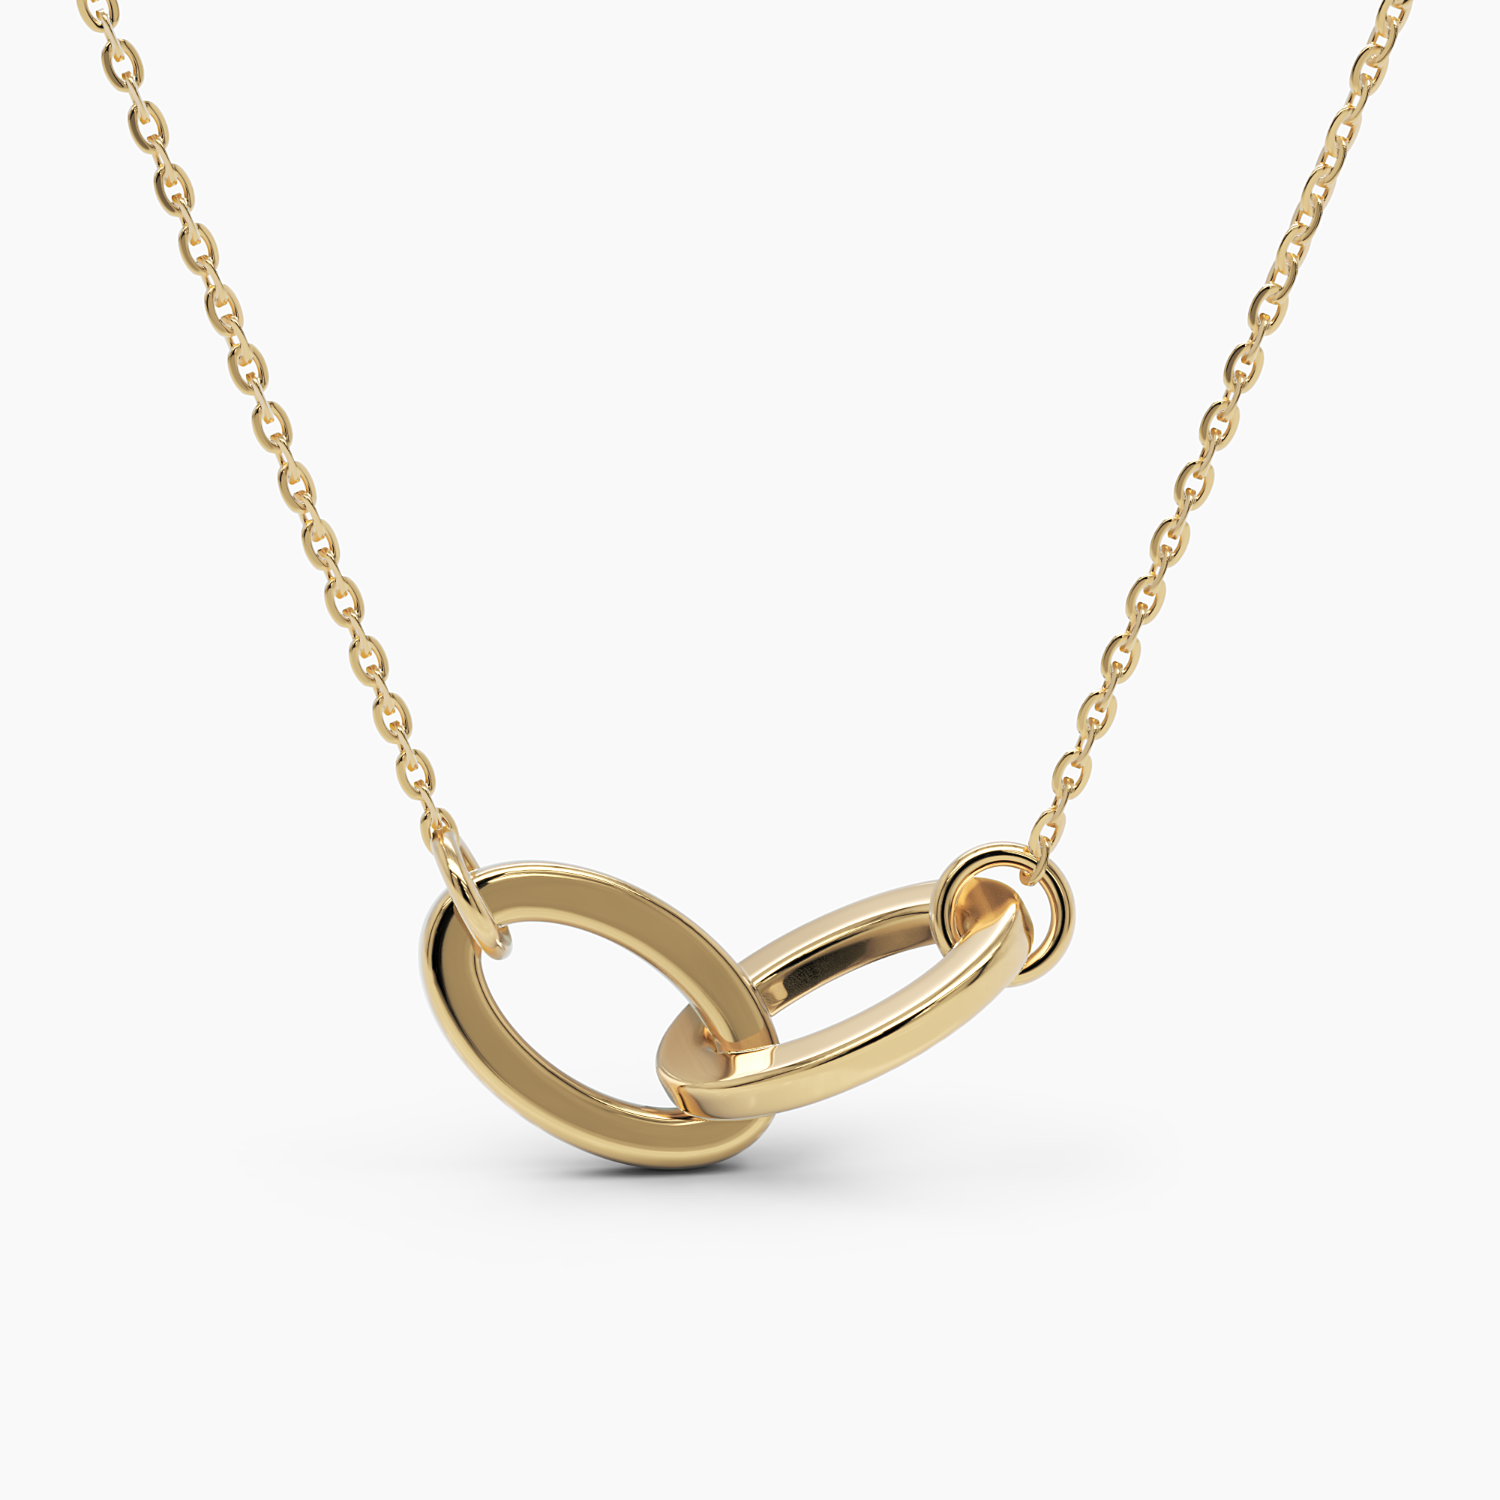 Interlinked Oval Circle Necklace